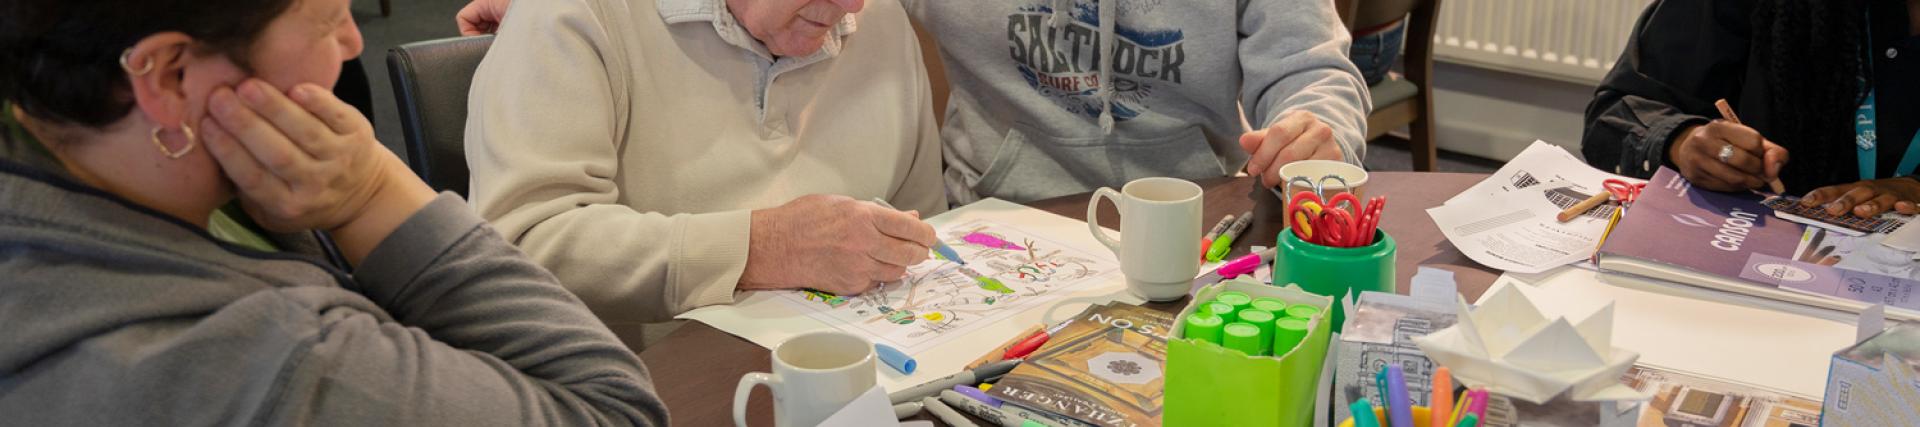 An older man is drawing using coloured pens at a table that is covered in art supplies. In the backgrounds there are other tables with different people sat at them.